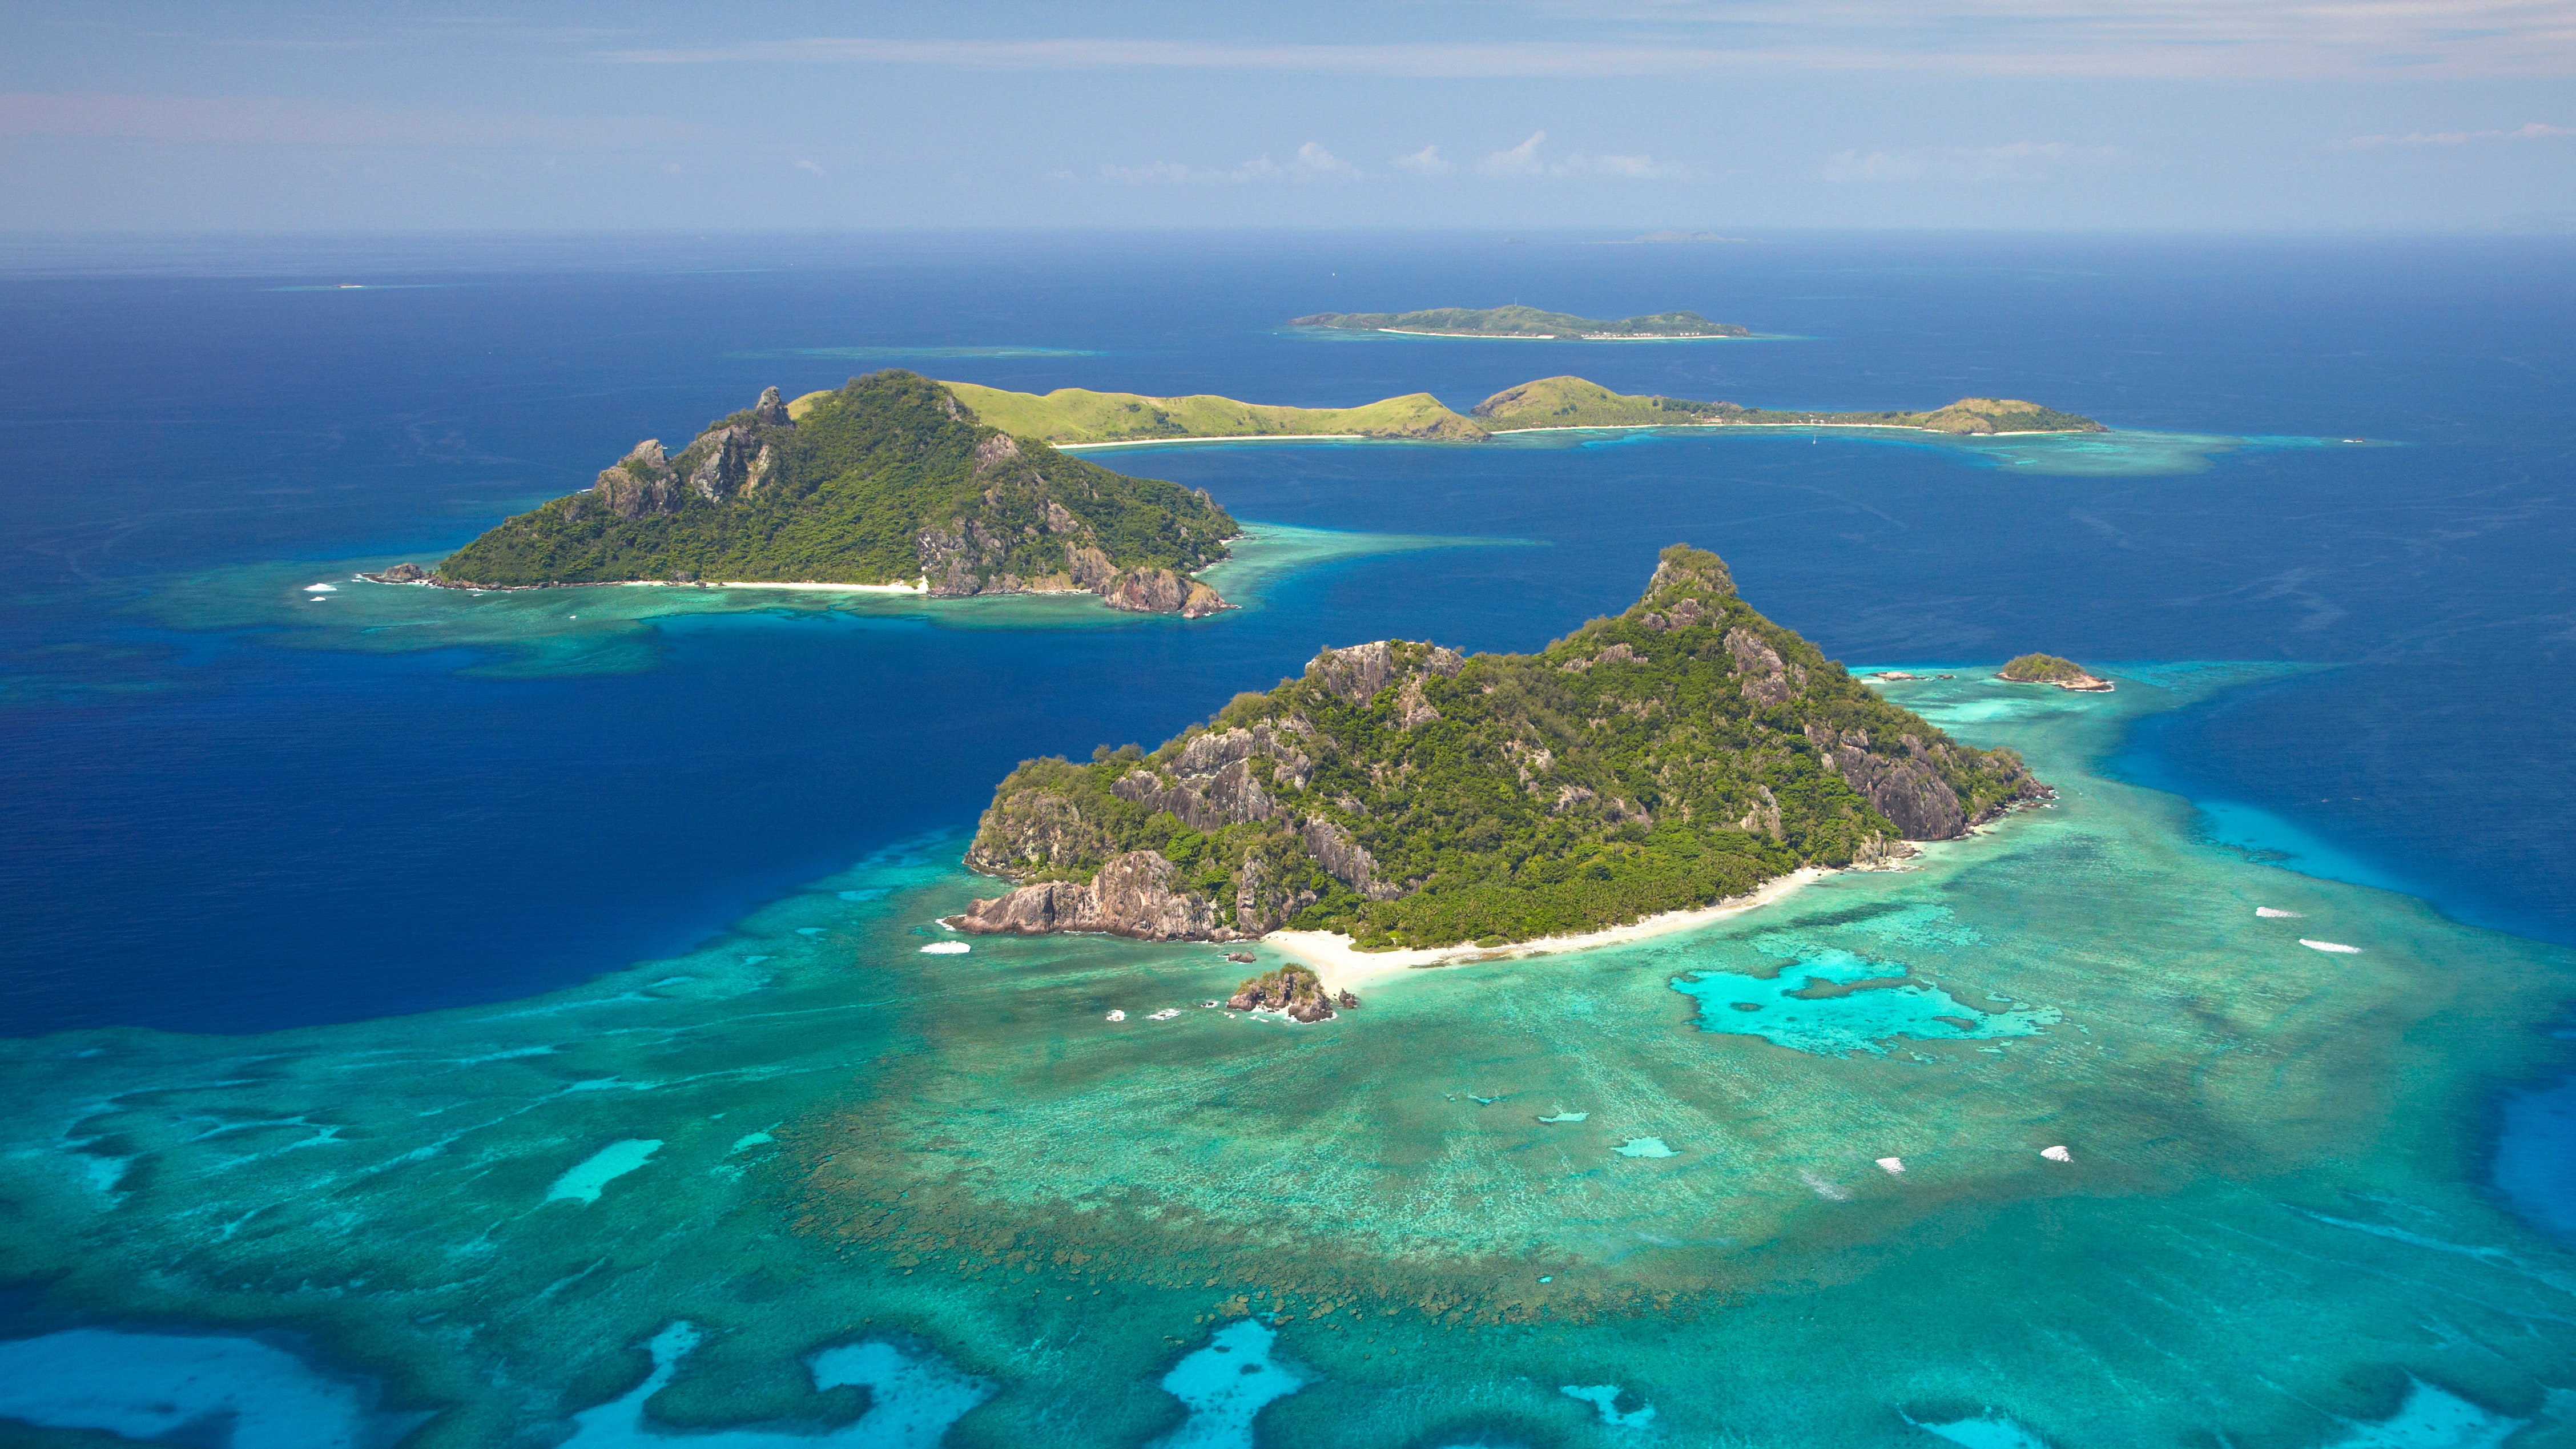 Photo That Will Make You Want to Visit Fiji. Condé Nast Traveler